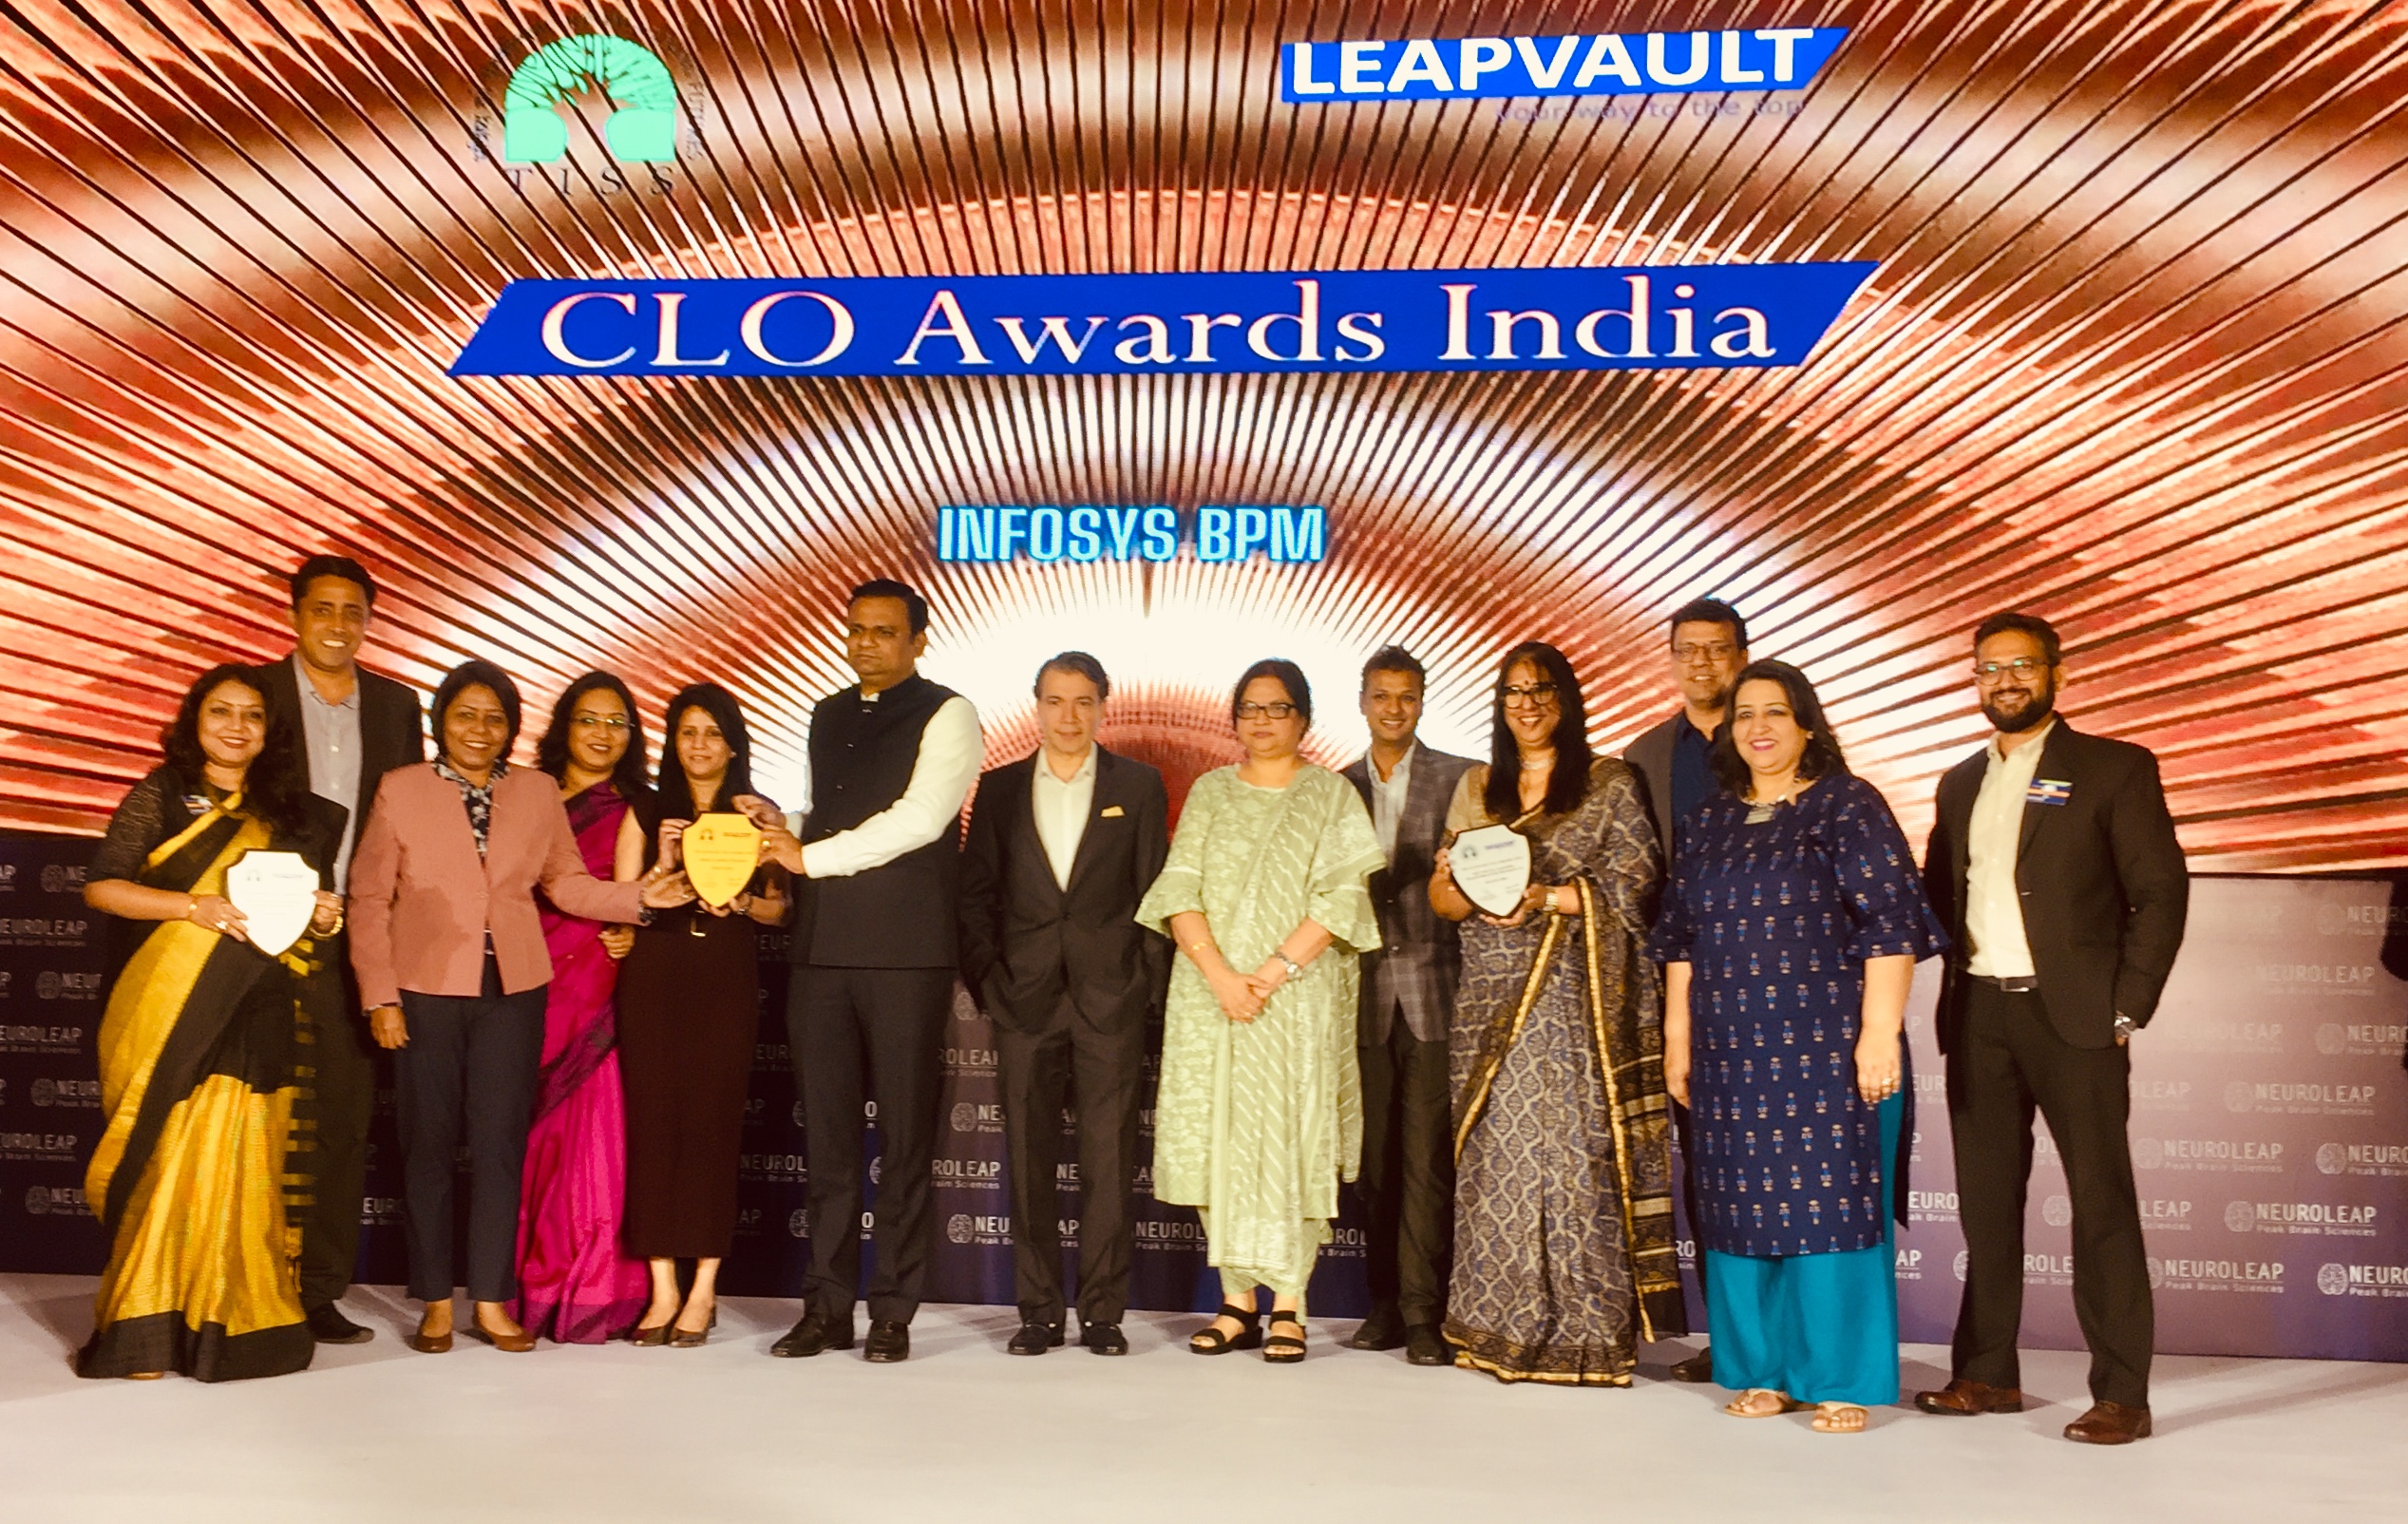 Infosys BPM wins big at TISS LeapVault CLO Awards India 2022